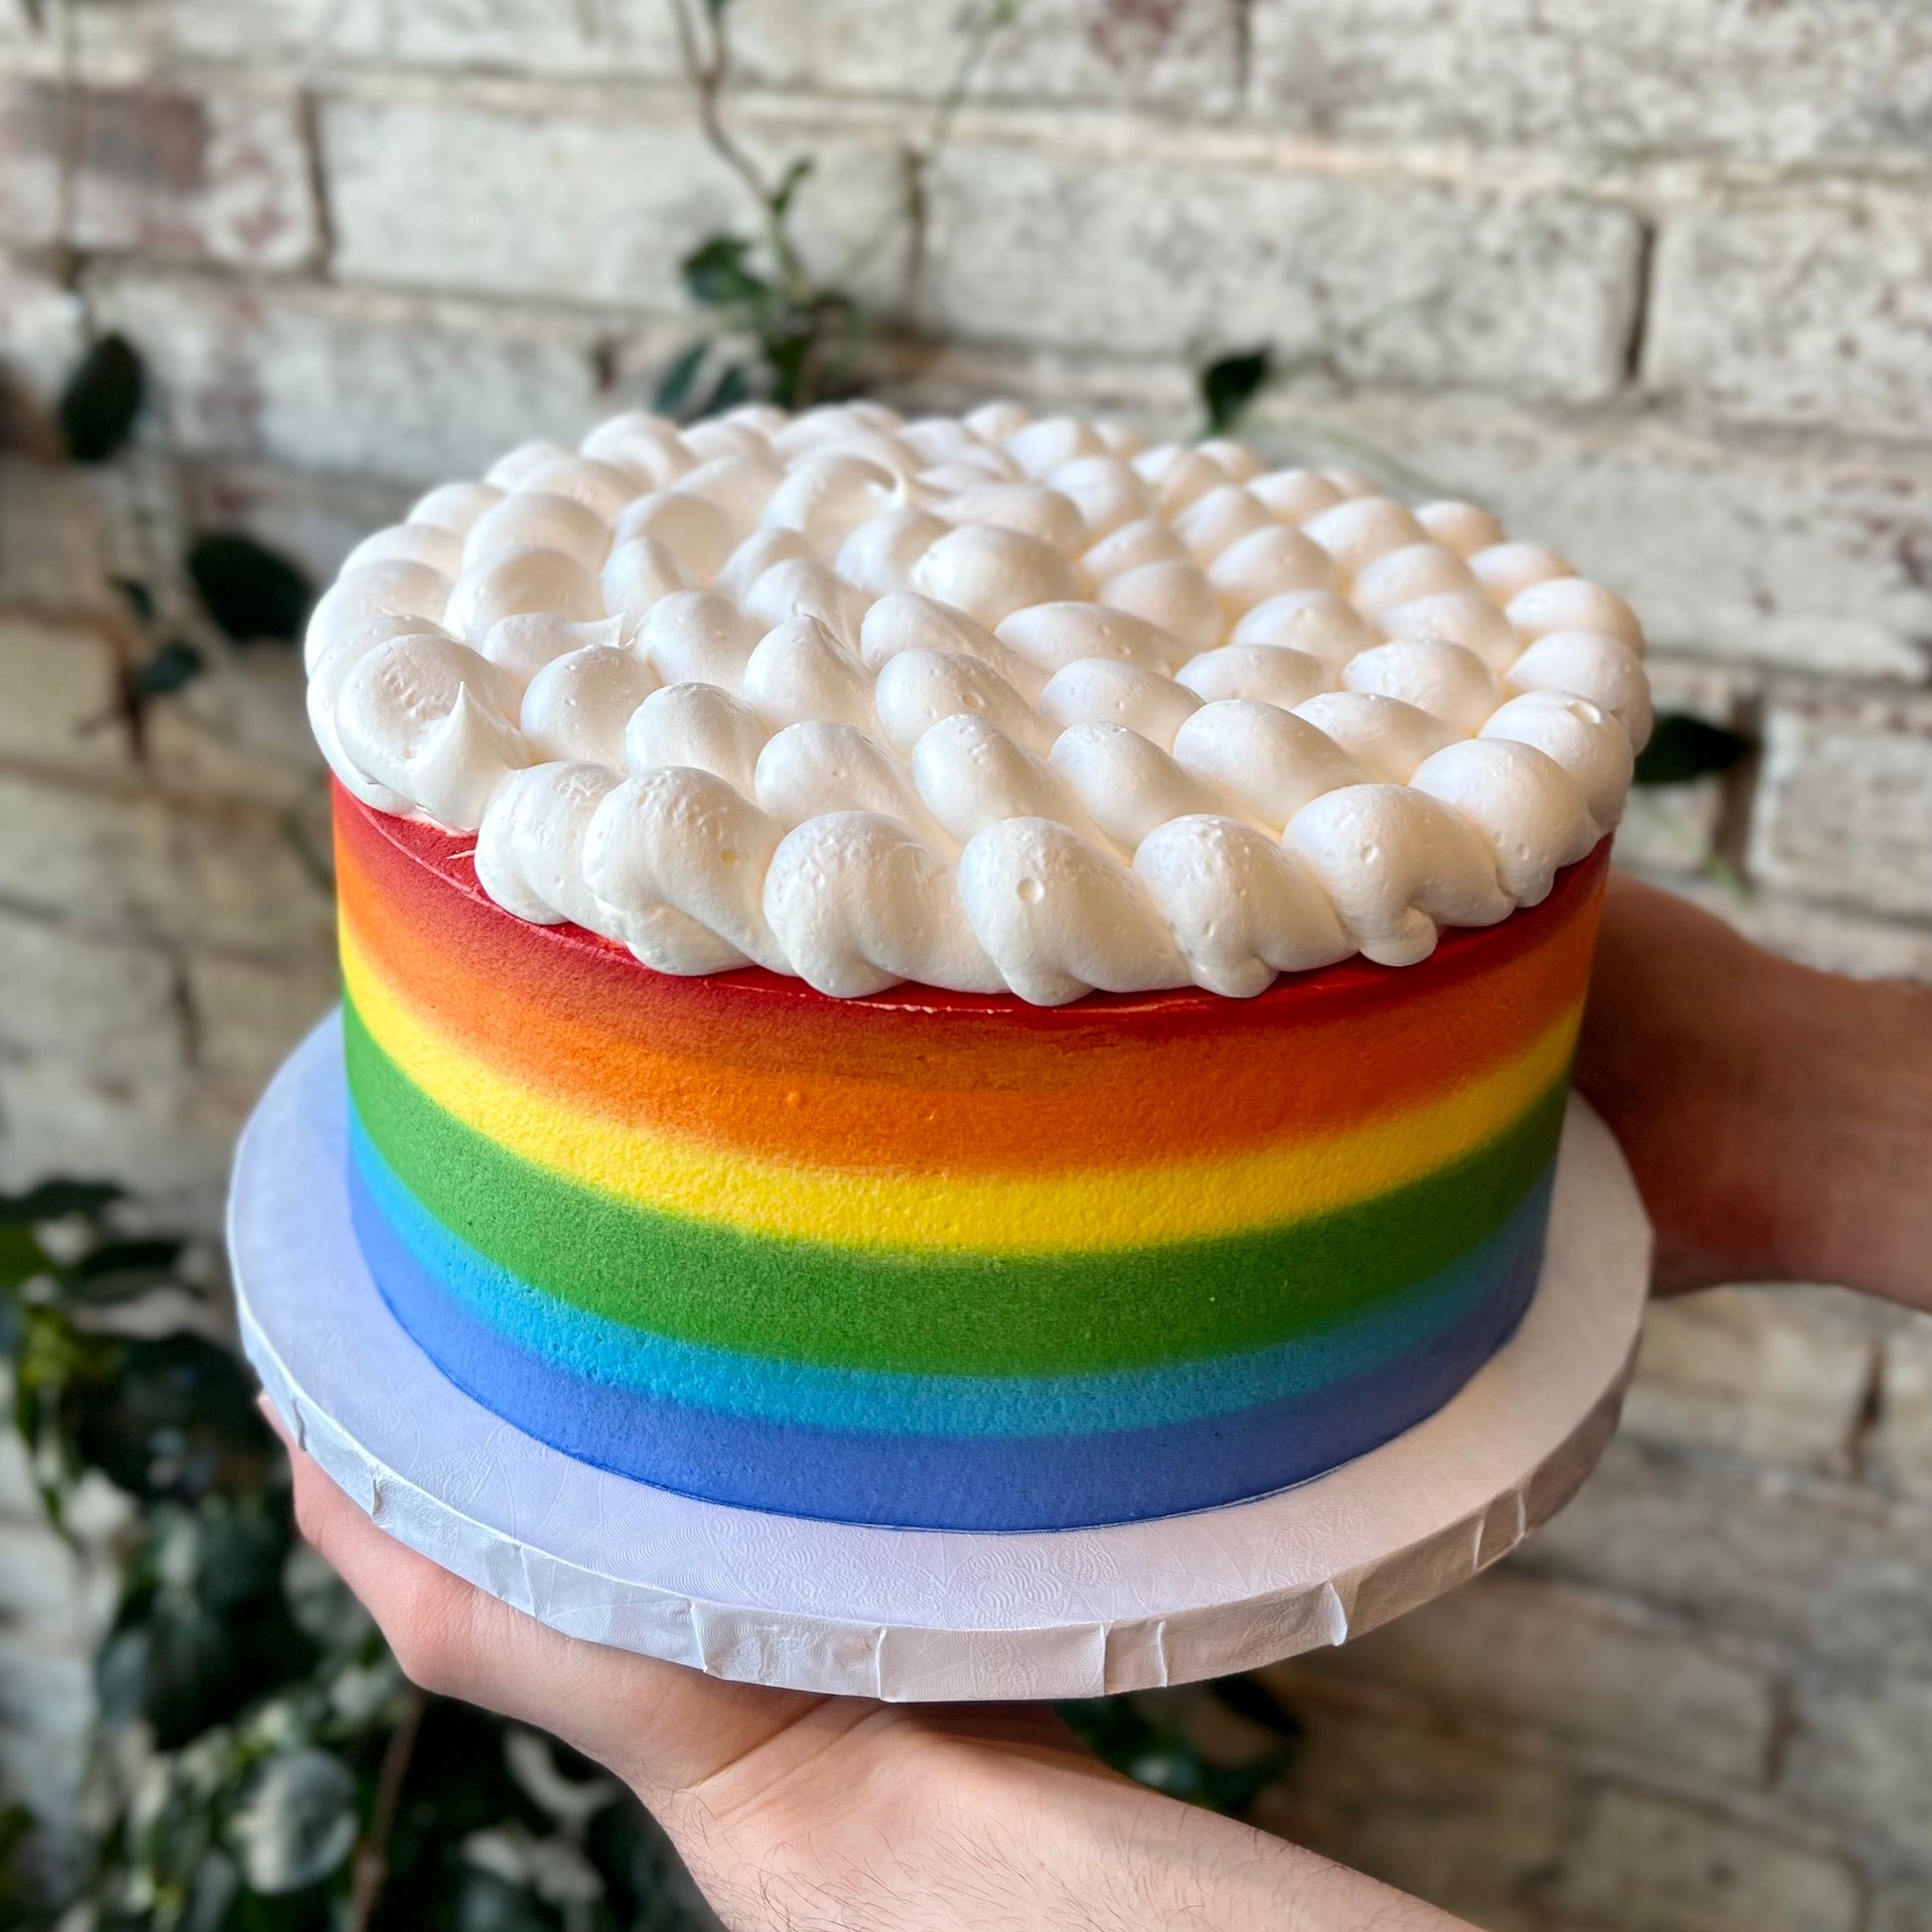 Cake with rainbow sides and white clouds on top